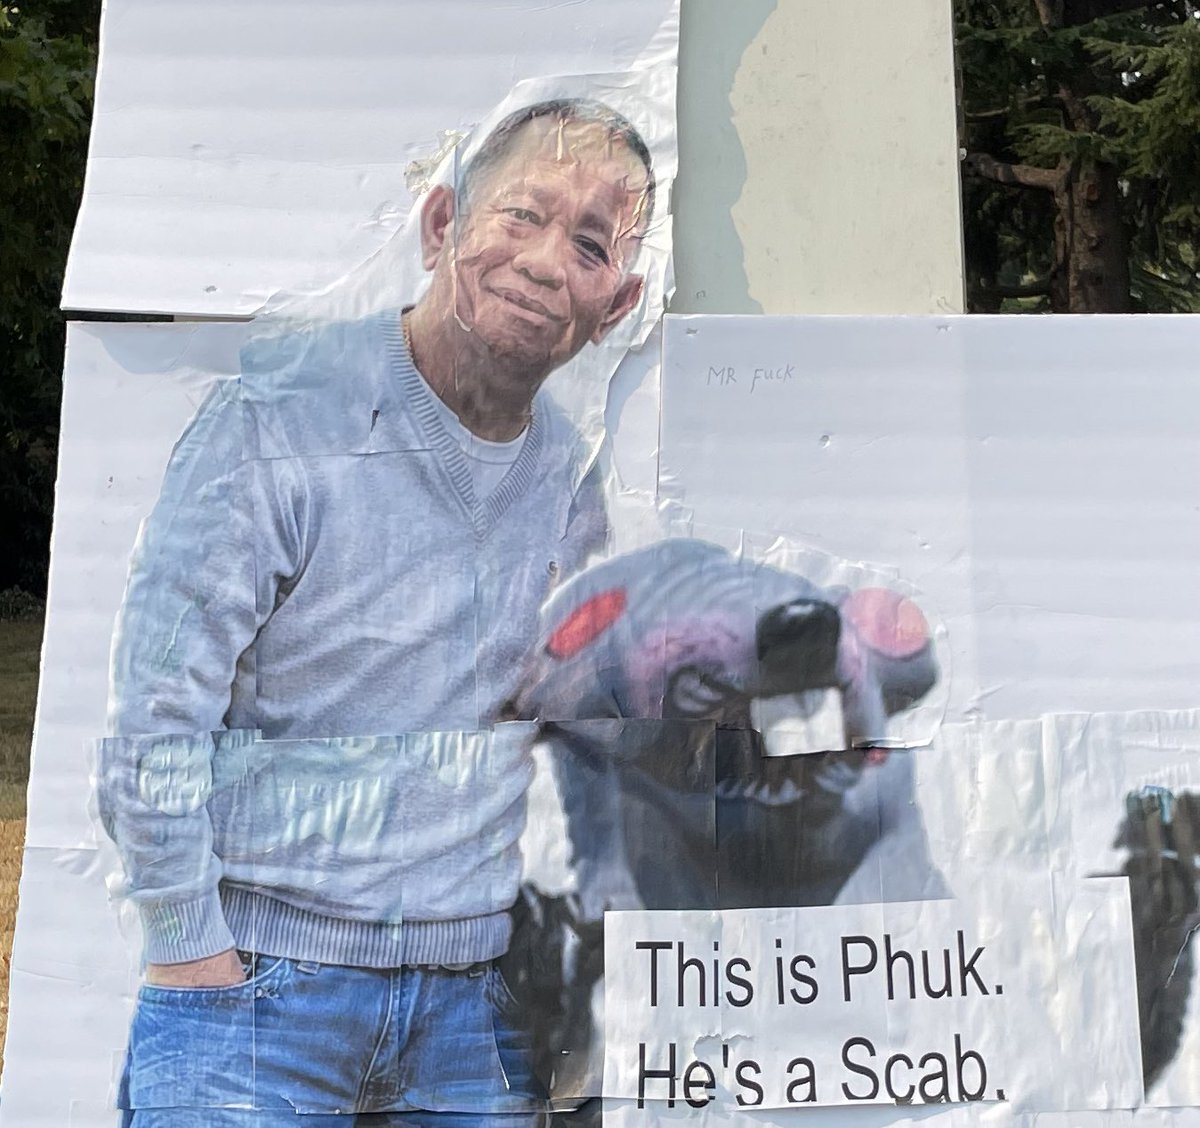 Don’t be like Phuk (the Nabisco scab in Portland) #boycottNabisco #NoContractNoSnacks 

donate to the strike funds: linktr.ee/NabiscoStrikeF…